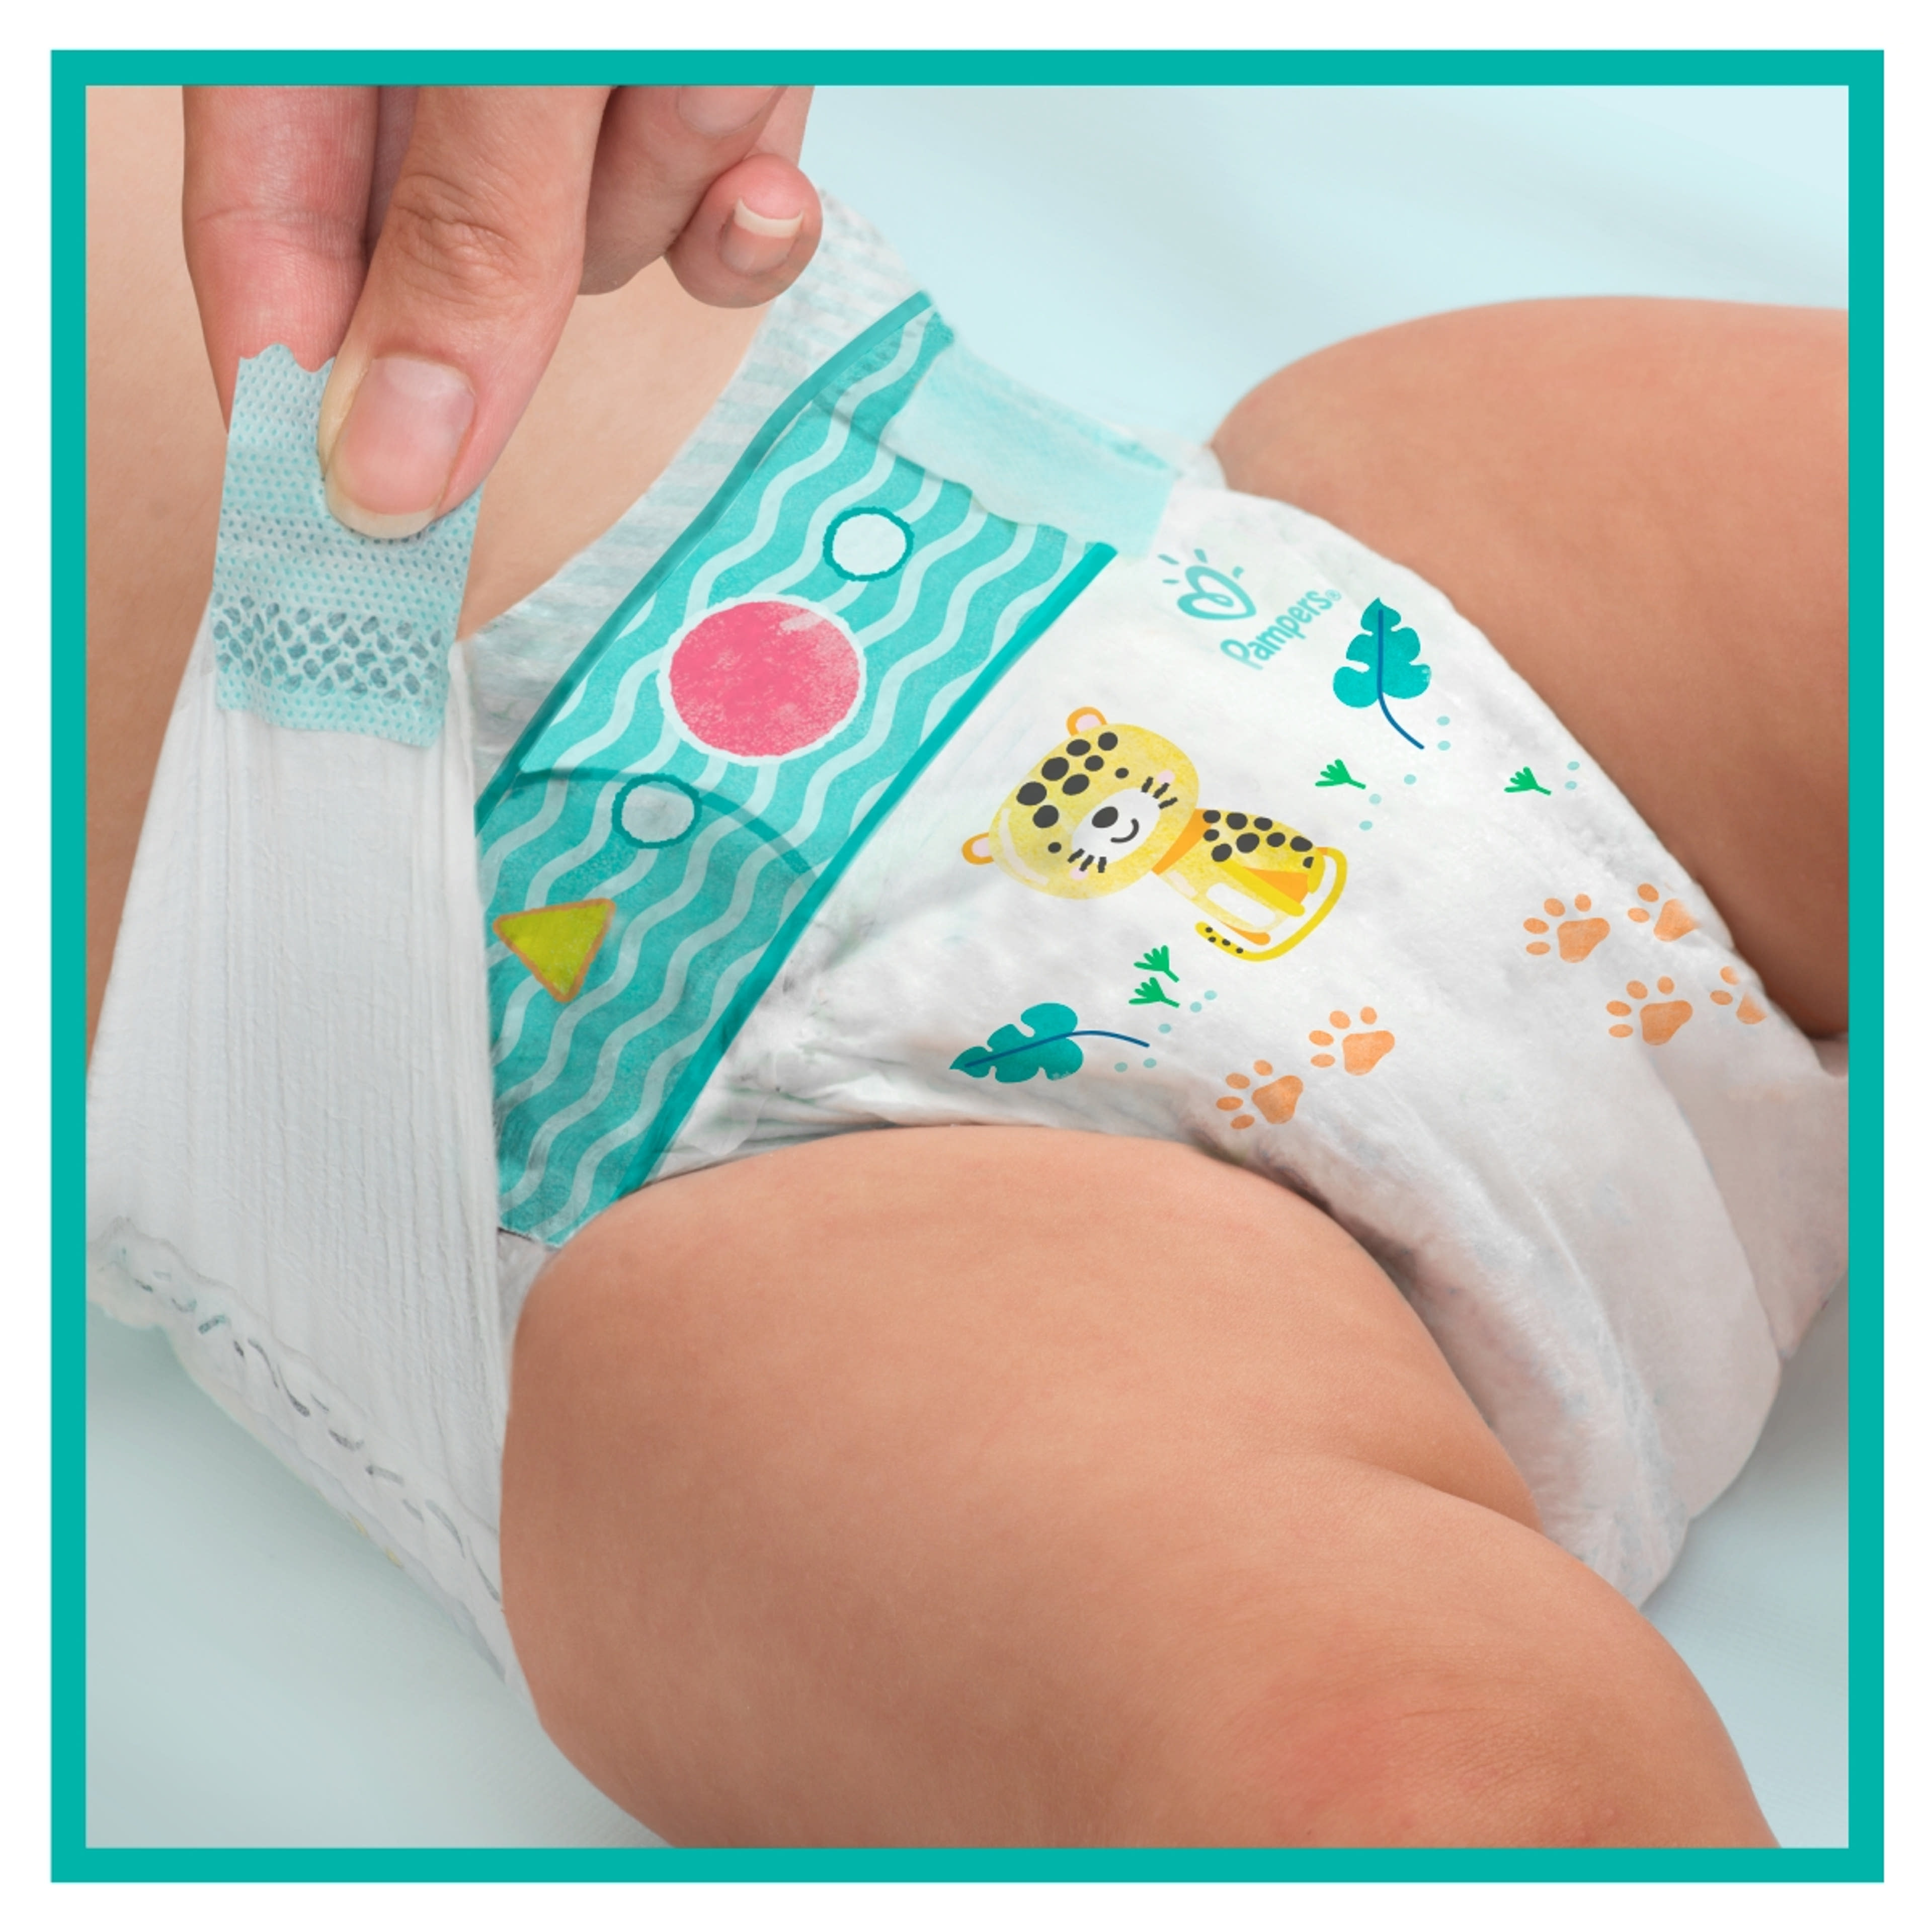 Pampers Active Baby Giant Pack Pelenka 4 - 76 db-2